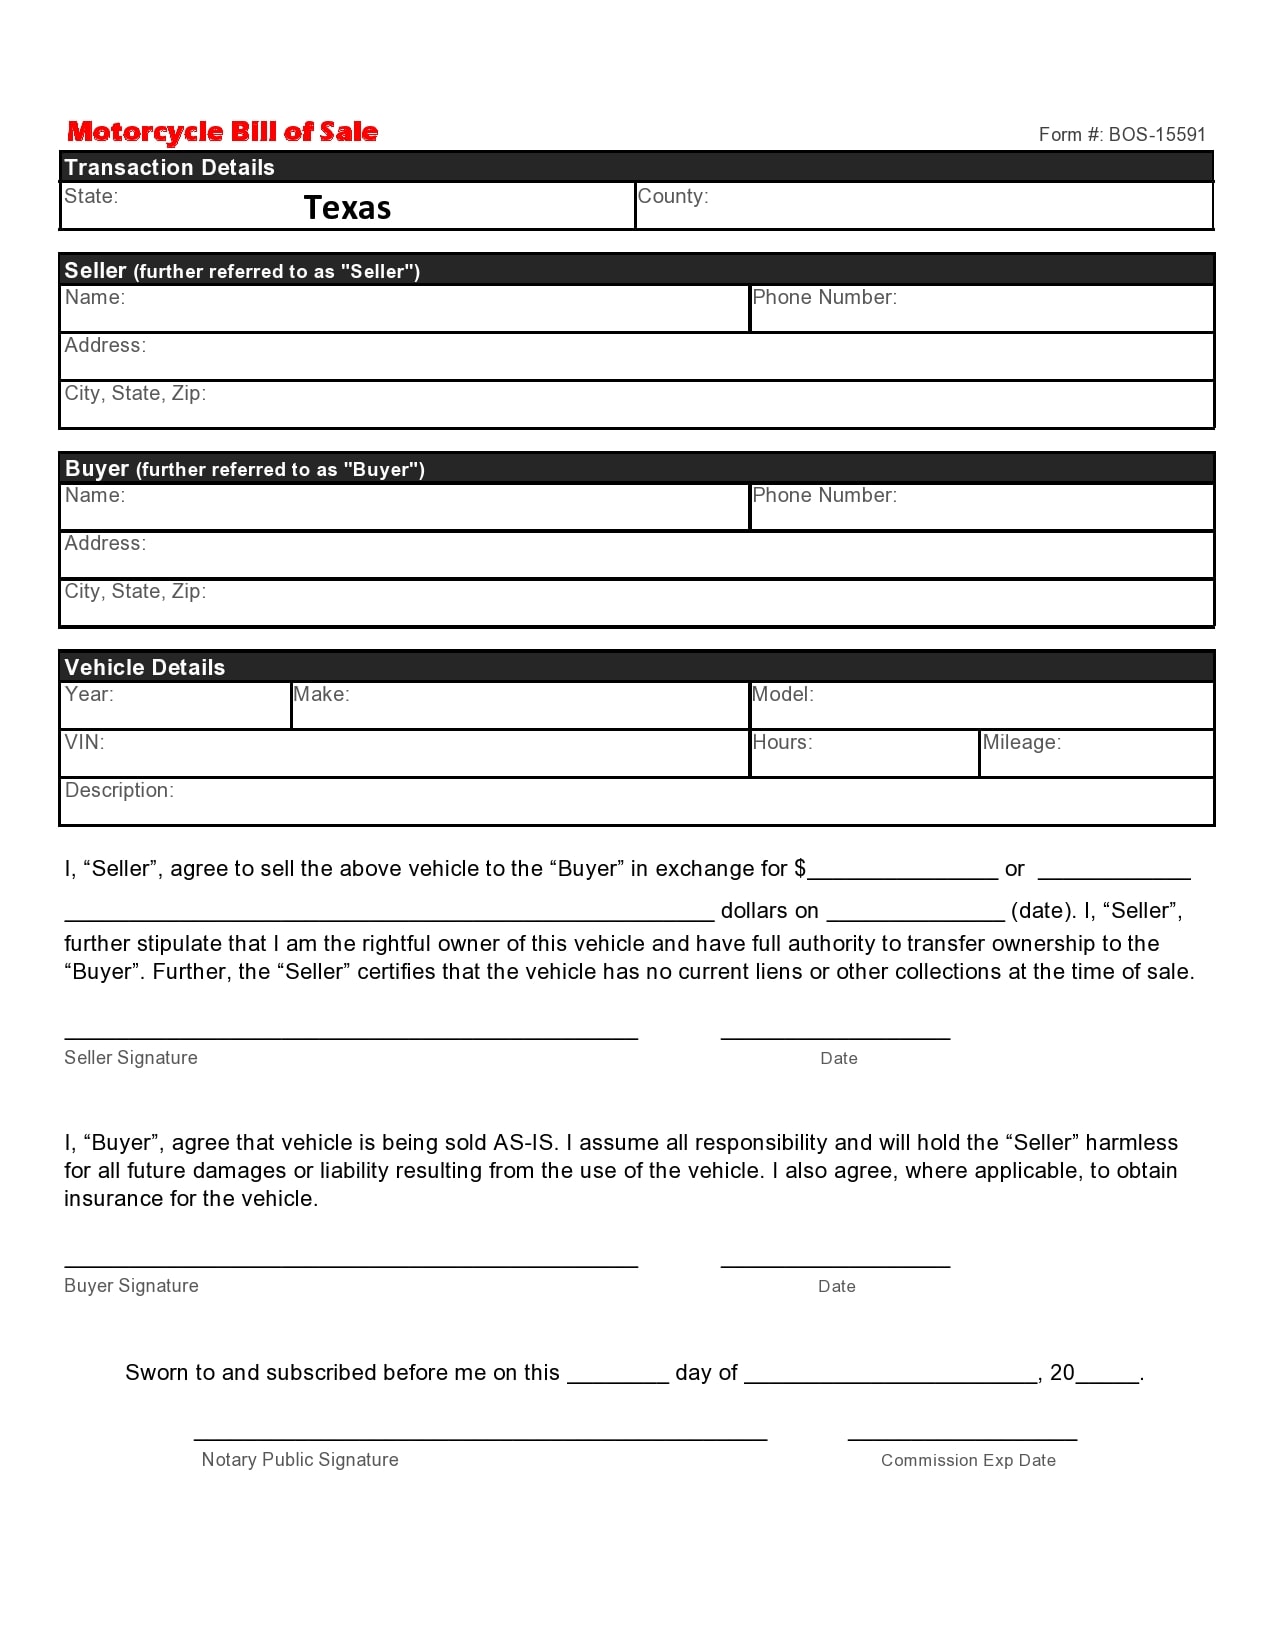 29-printable-motorcycle-bill-of-sale-forms-free-templatearchive